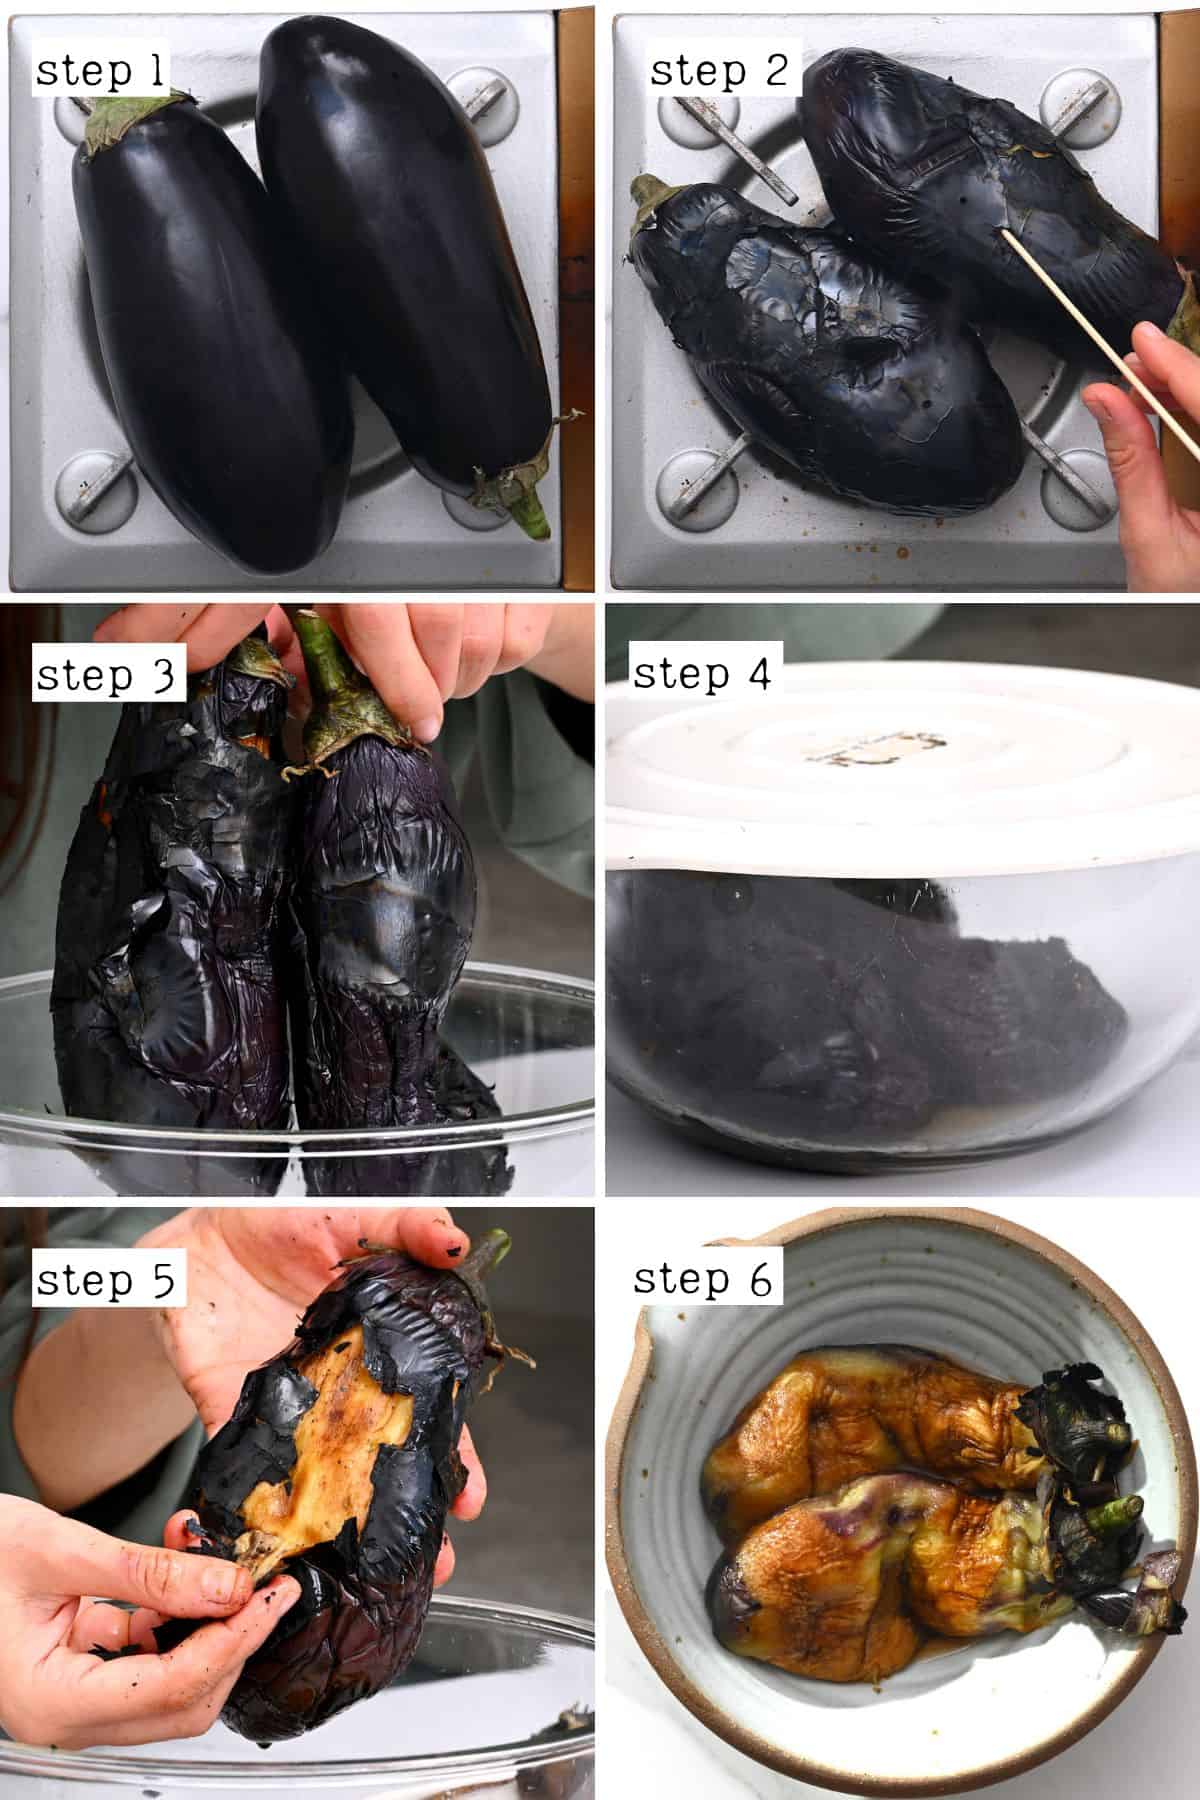 Steps for charring and peeling eggplants